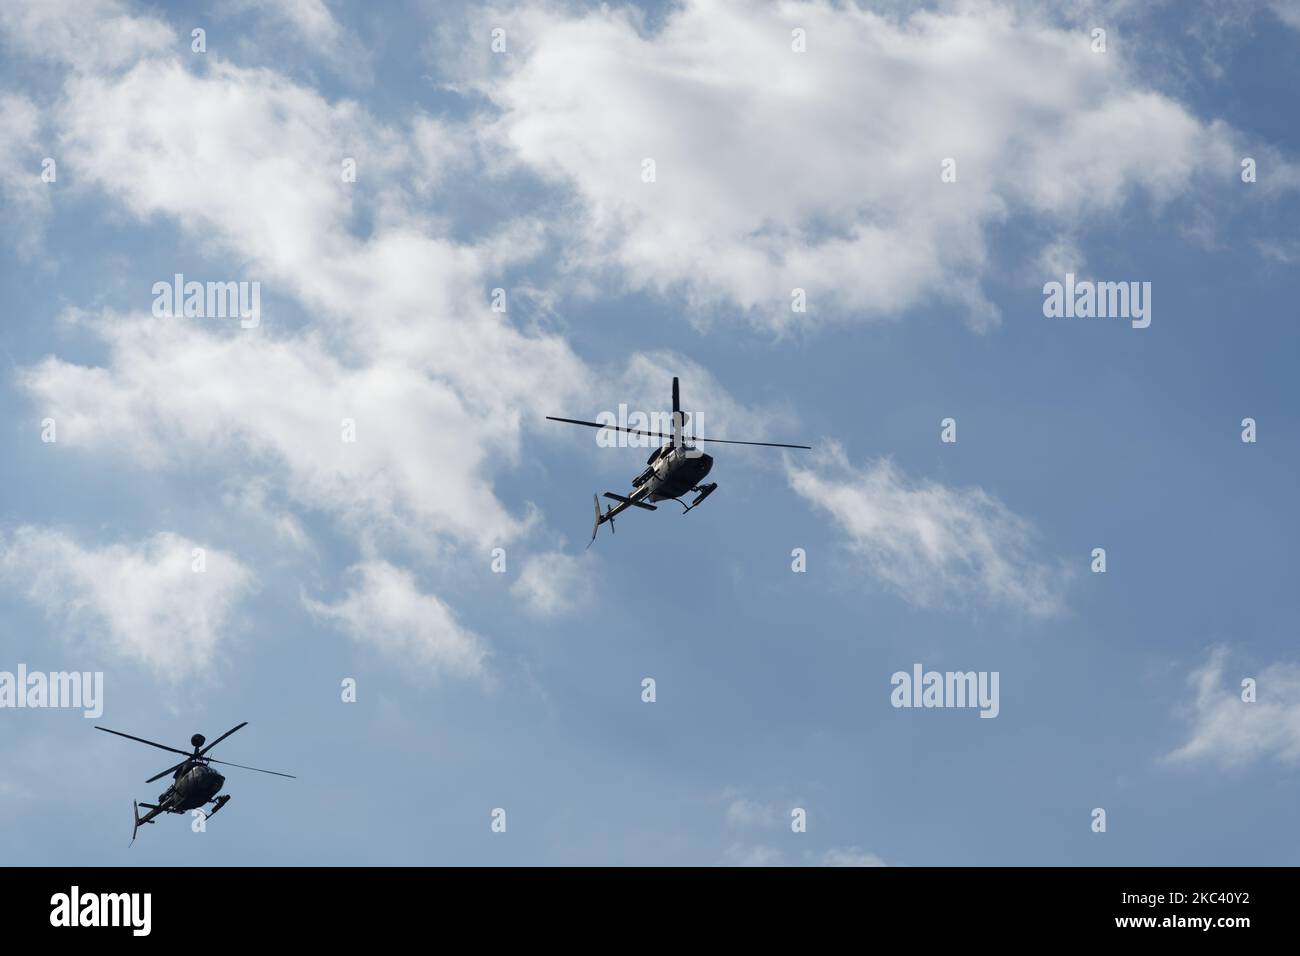 Kiowa Warrior helicopter during an air show. Greek Air Force Bell OH-58 flying during the National Oxi Day parade in Thessaloniki, Greece. Stock Photo